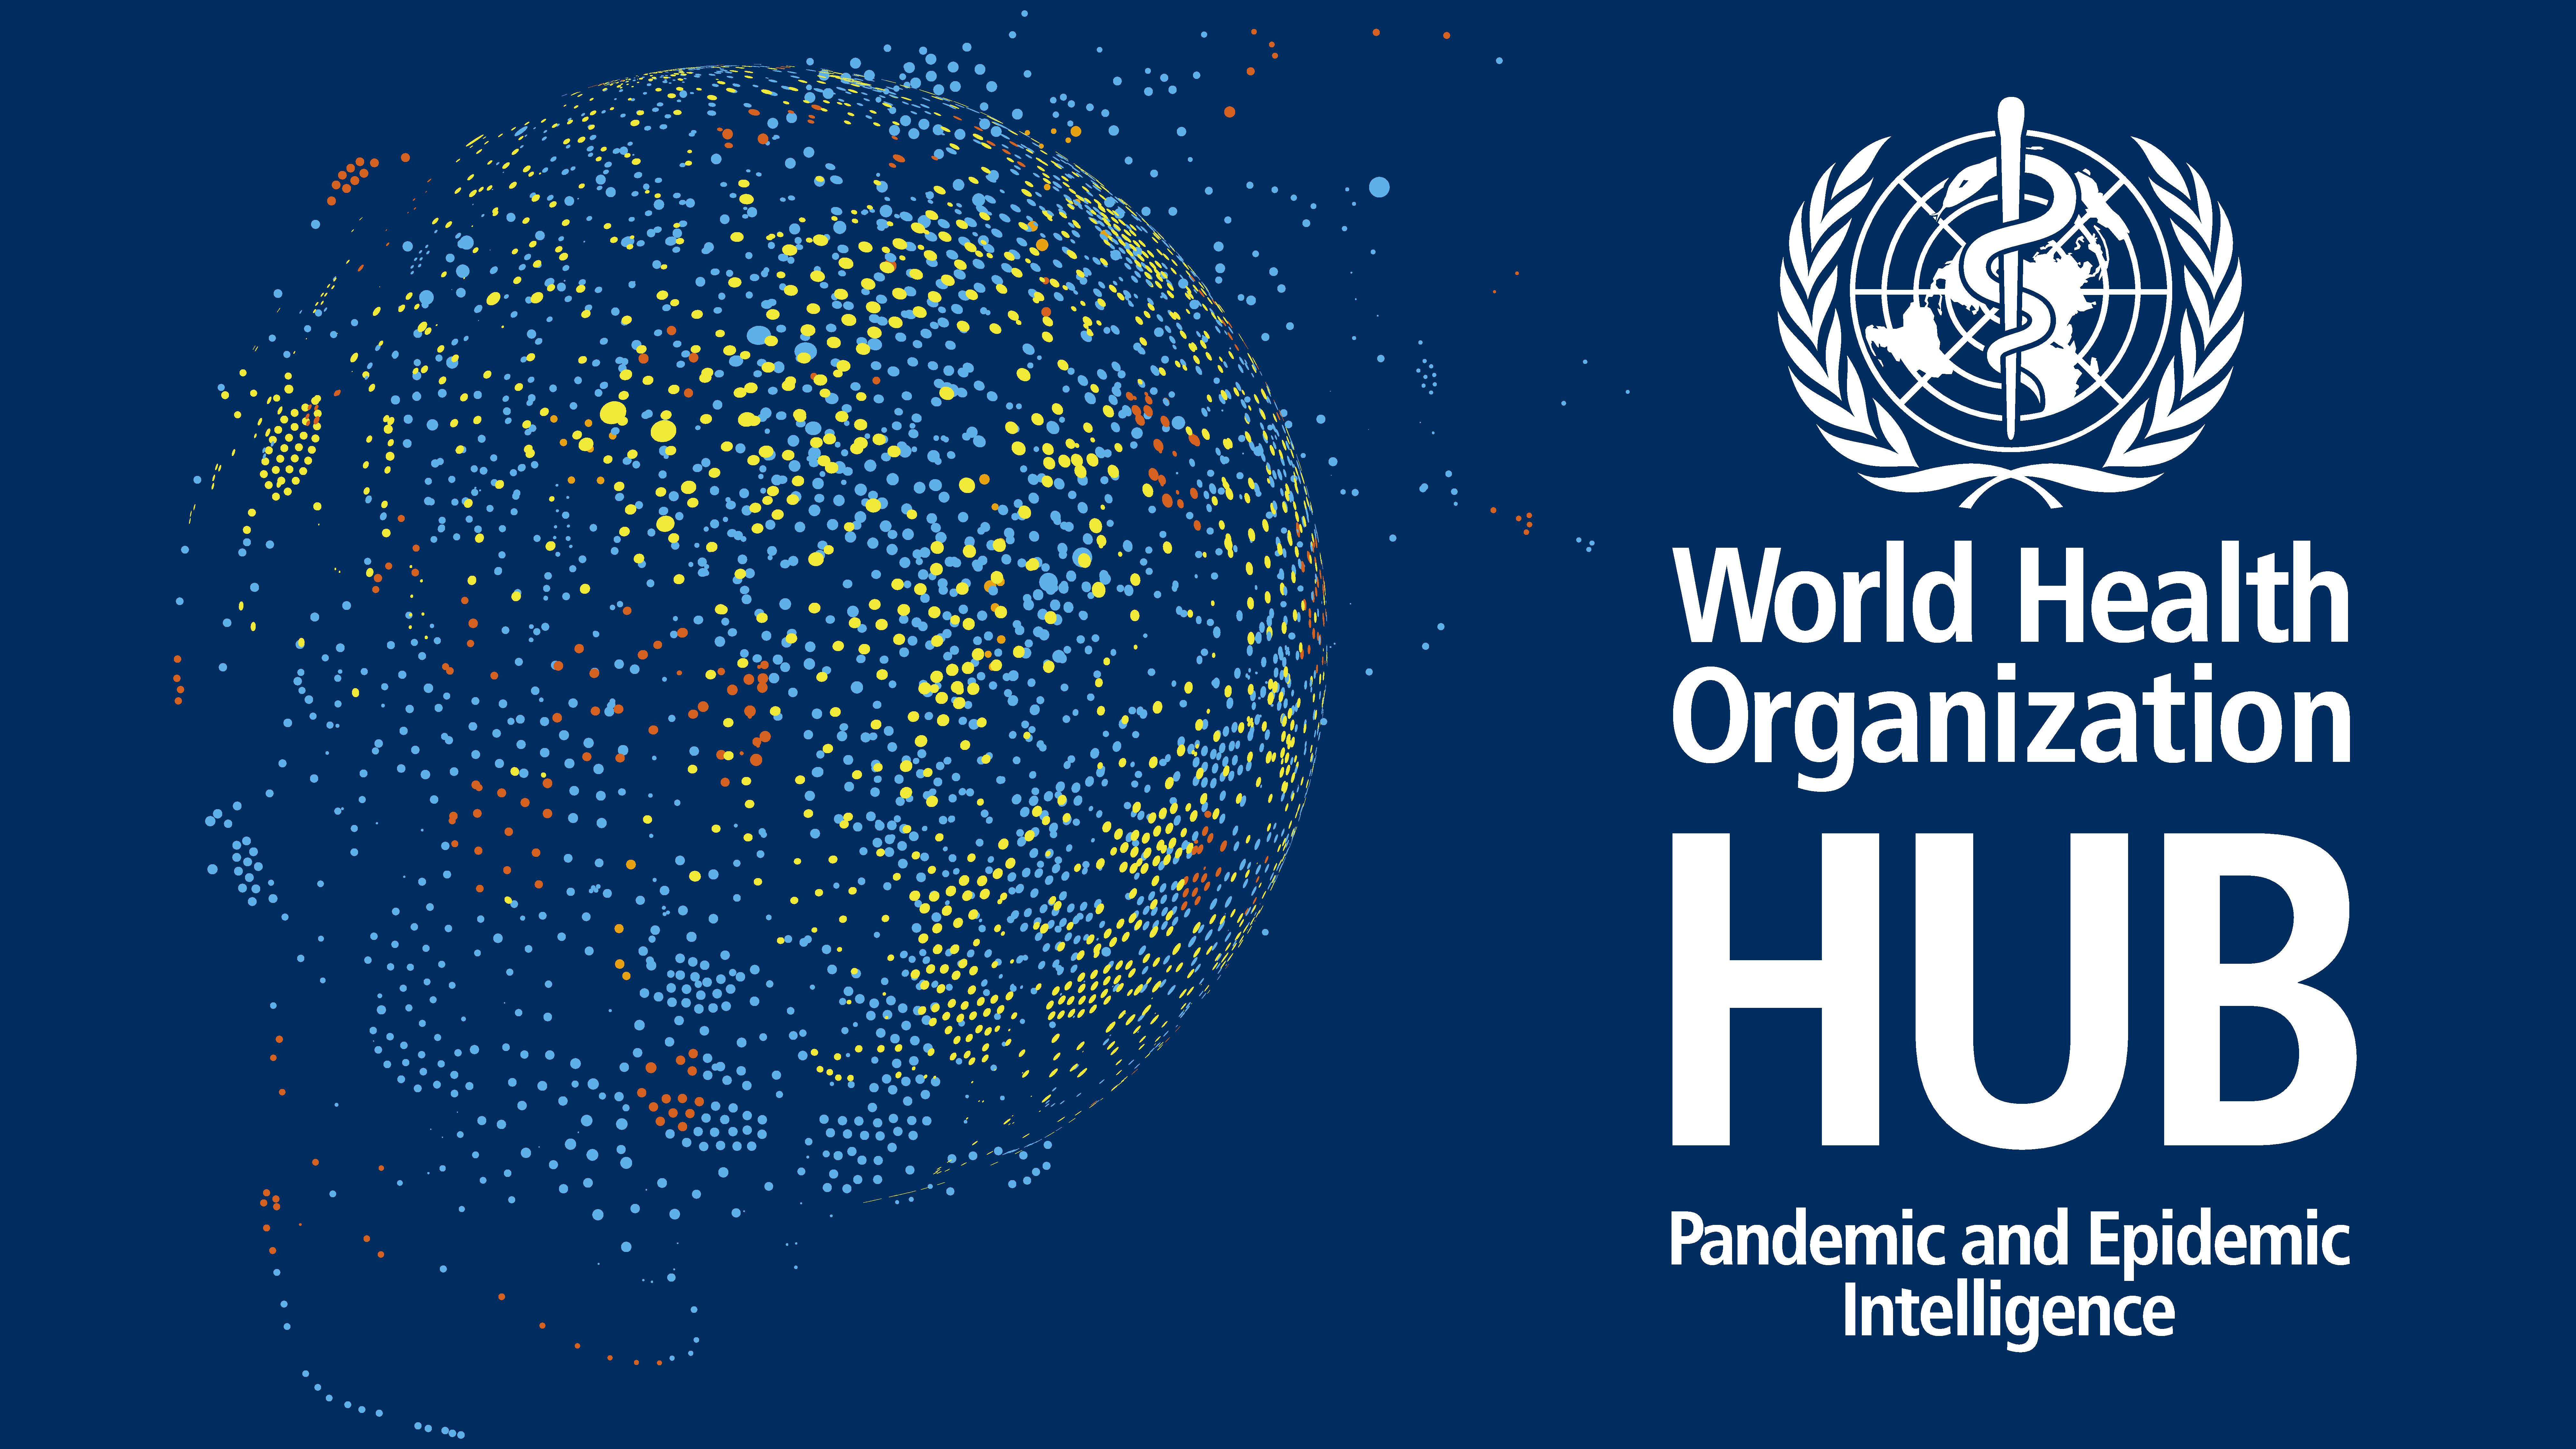 The logo of the World Health Organization Hub for Pandemic and Epidemic Intelligence